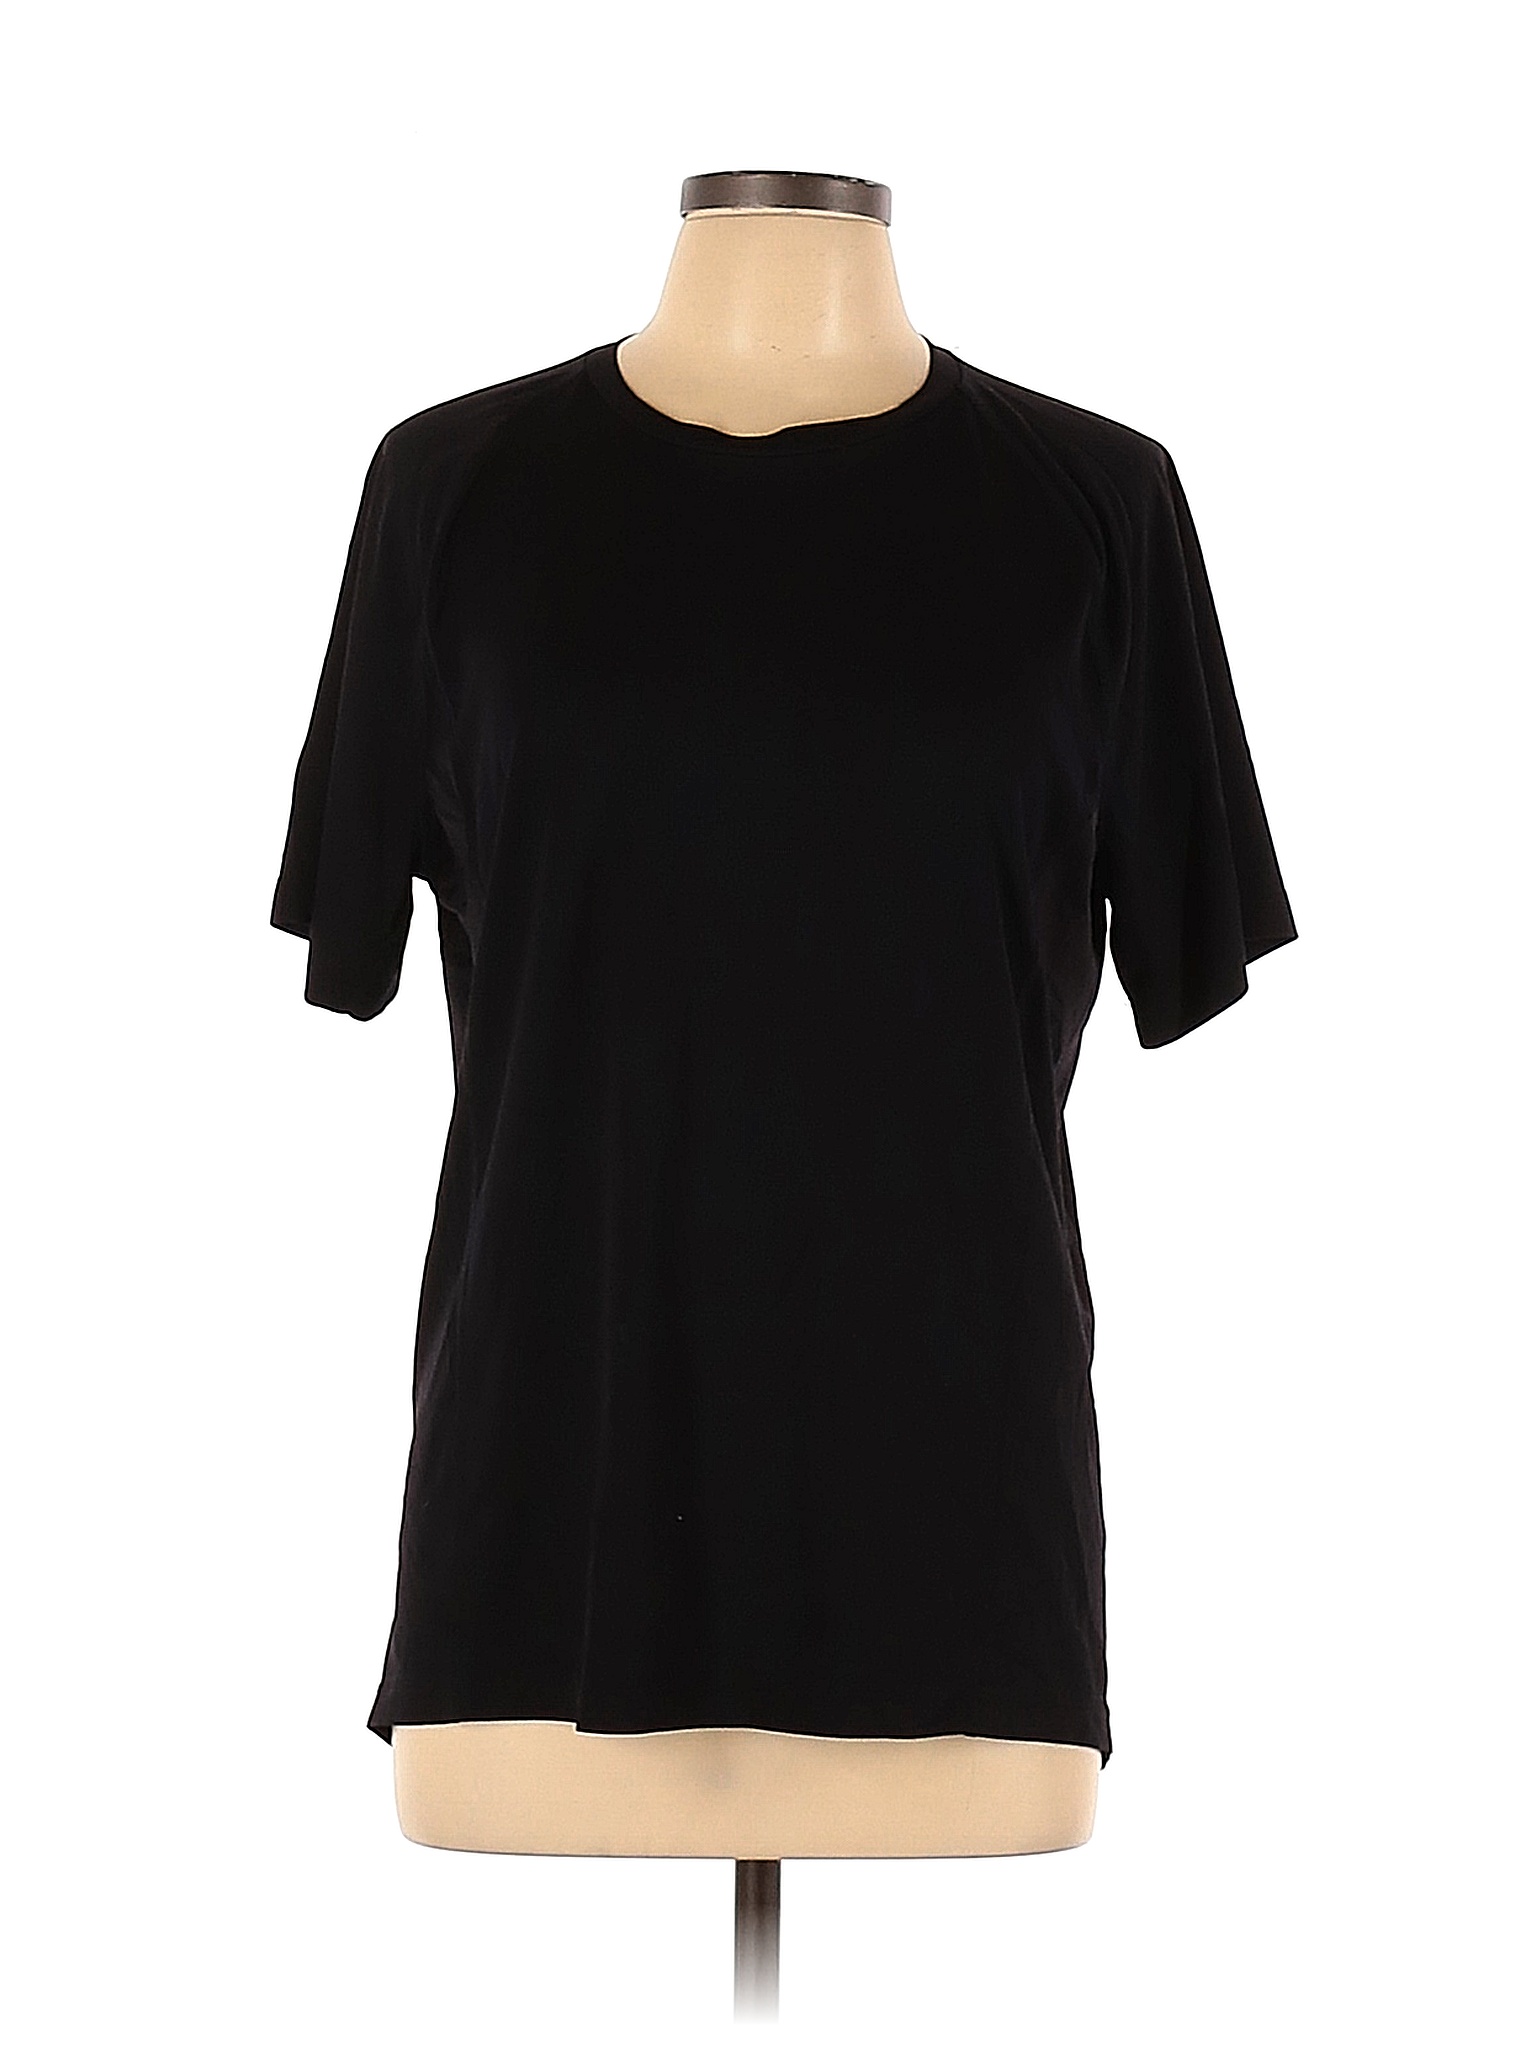 Xersion 100% Polyester Solid Black Active T-Shirt Size L - 75% off ...